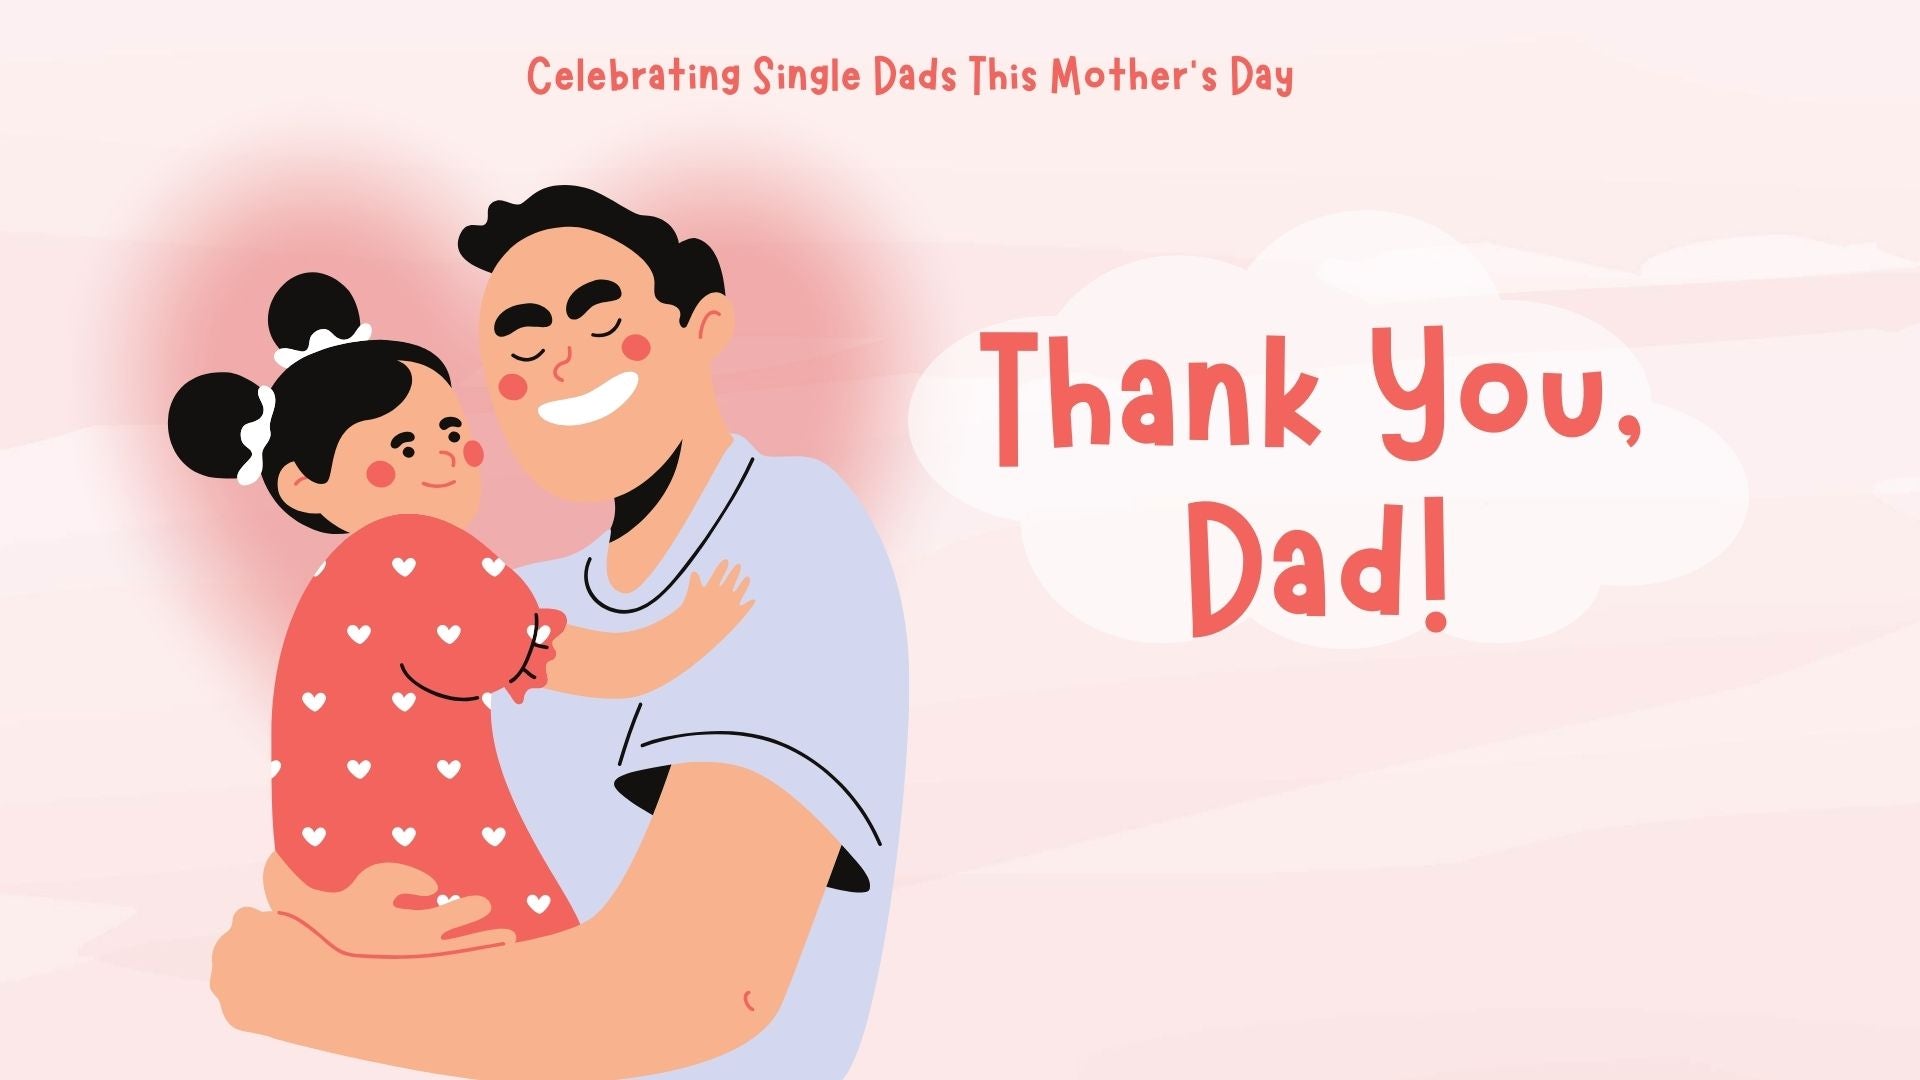 Creating a Memorable Mother's Day: Honoring Single Dads and Making it Extra Special